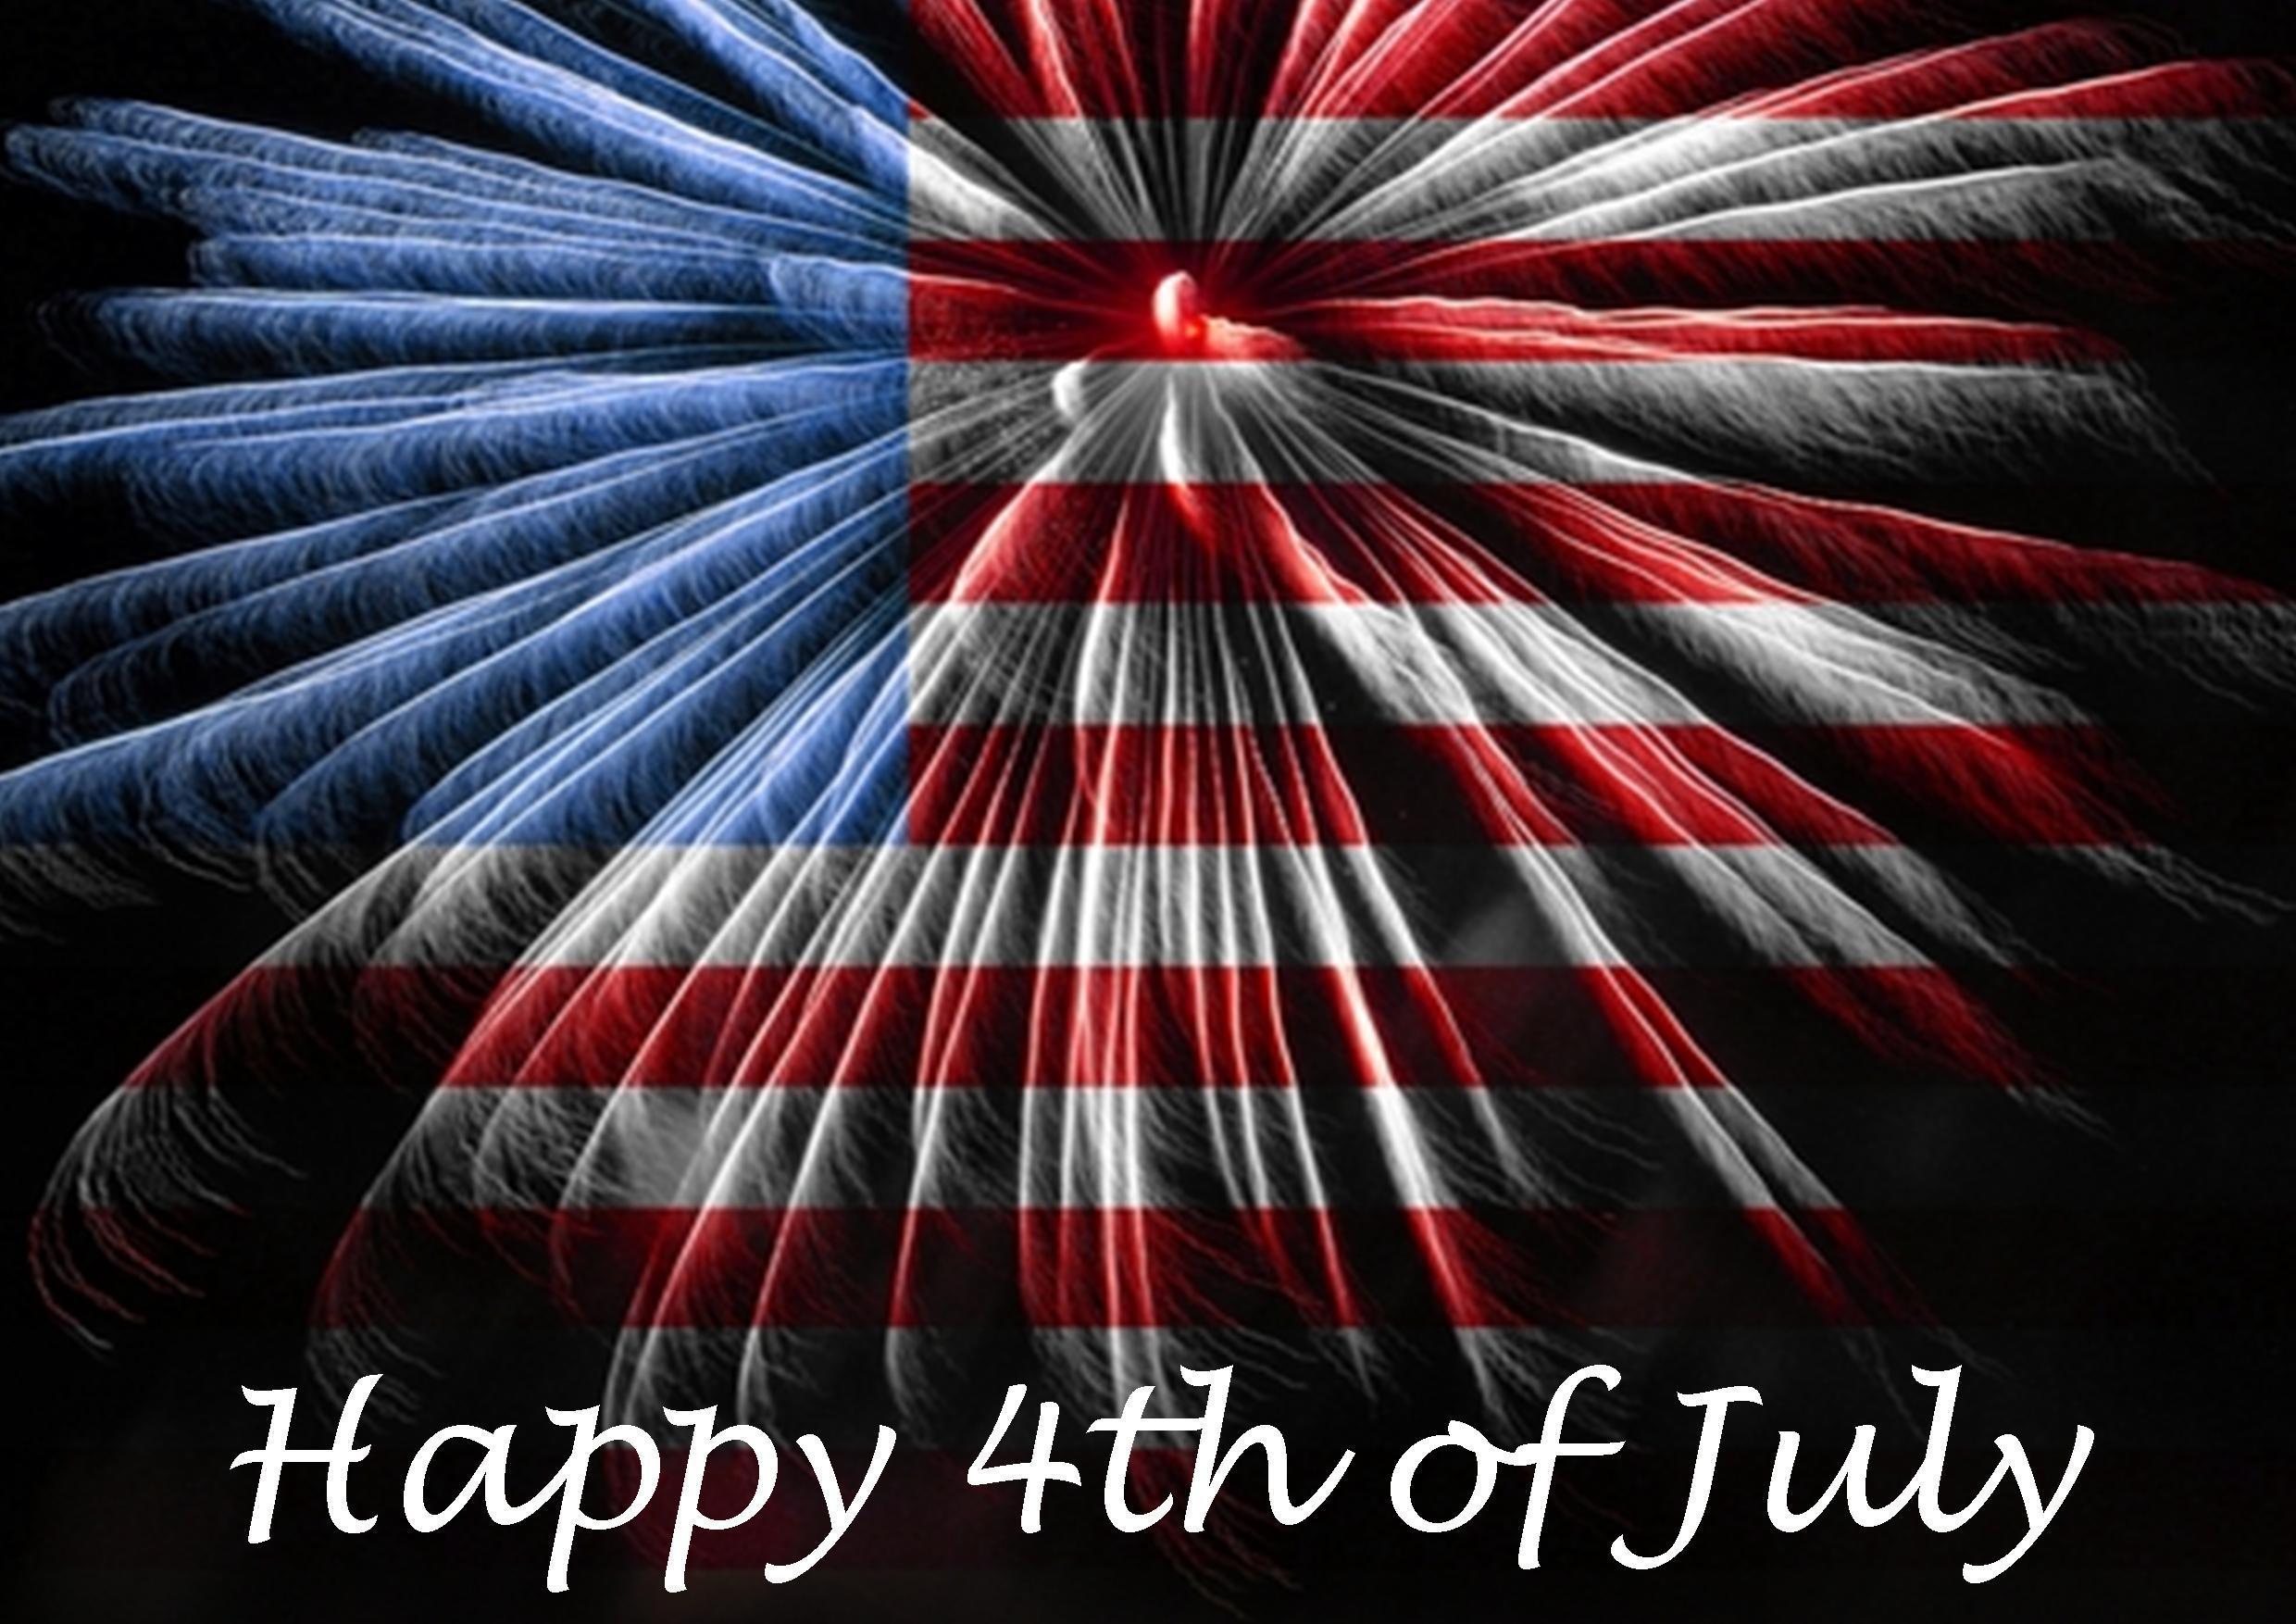 Happy 4th Of July 2020, Wallpaper & Image GIFs for Android